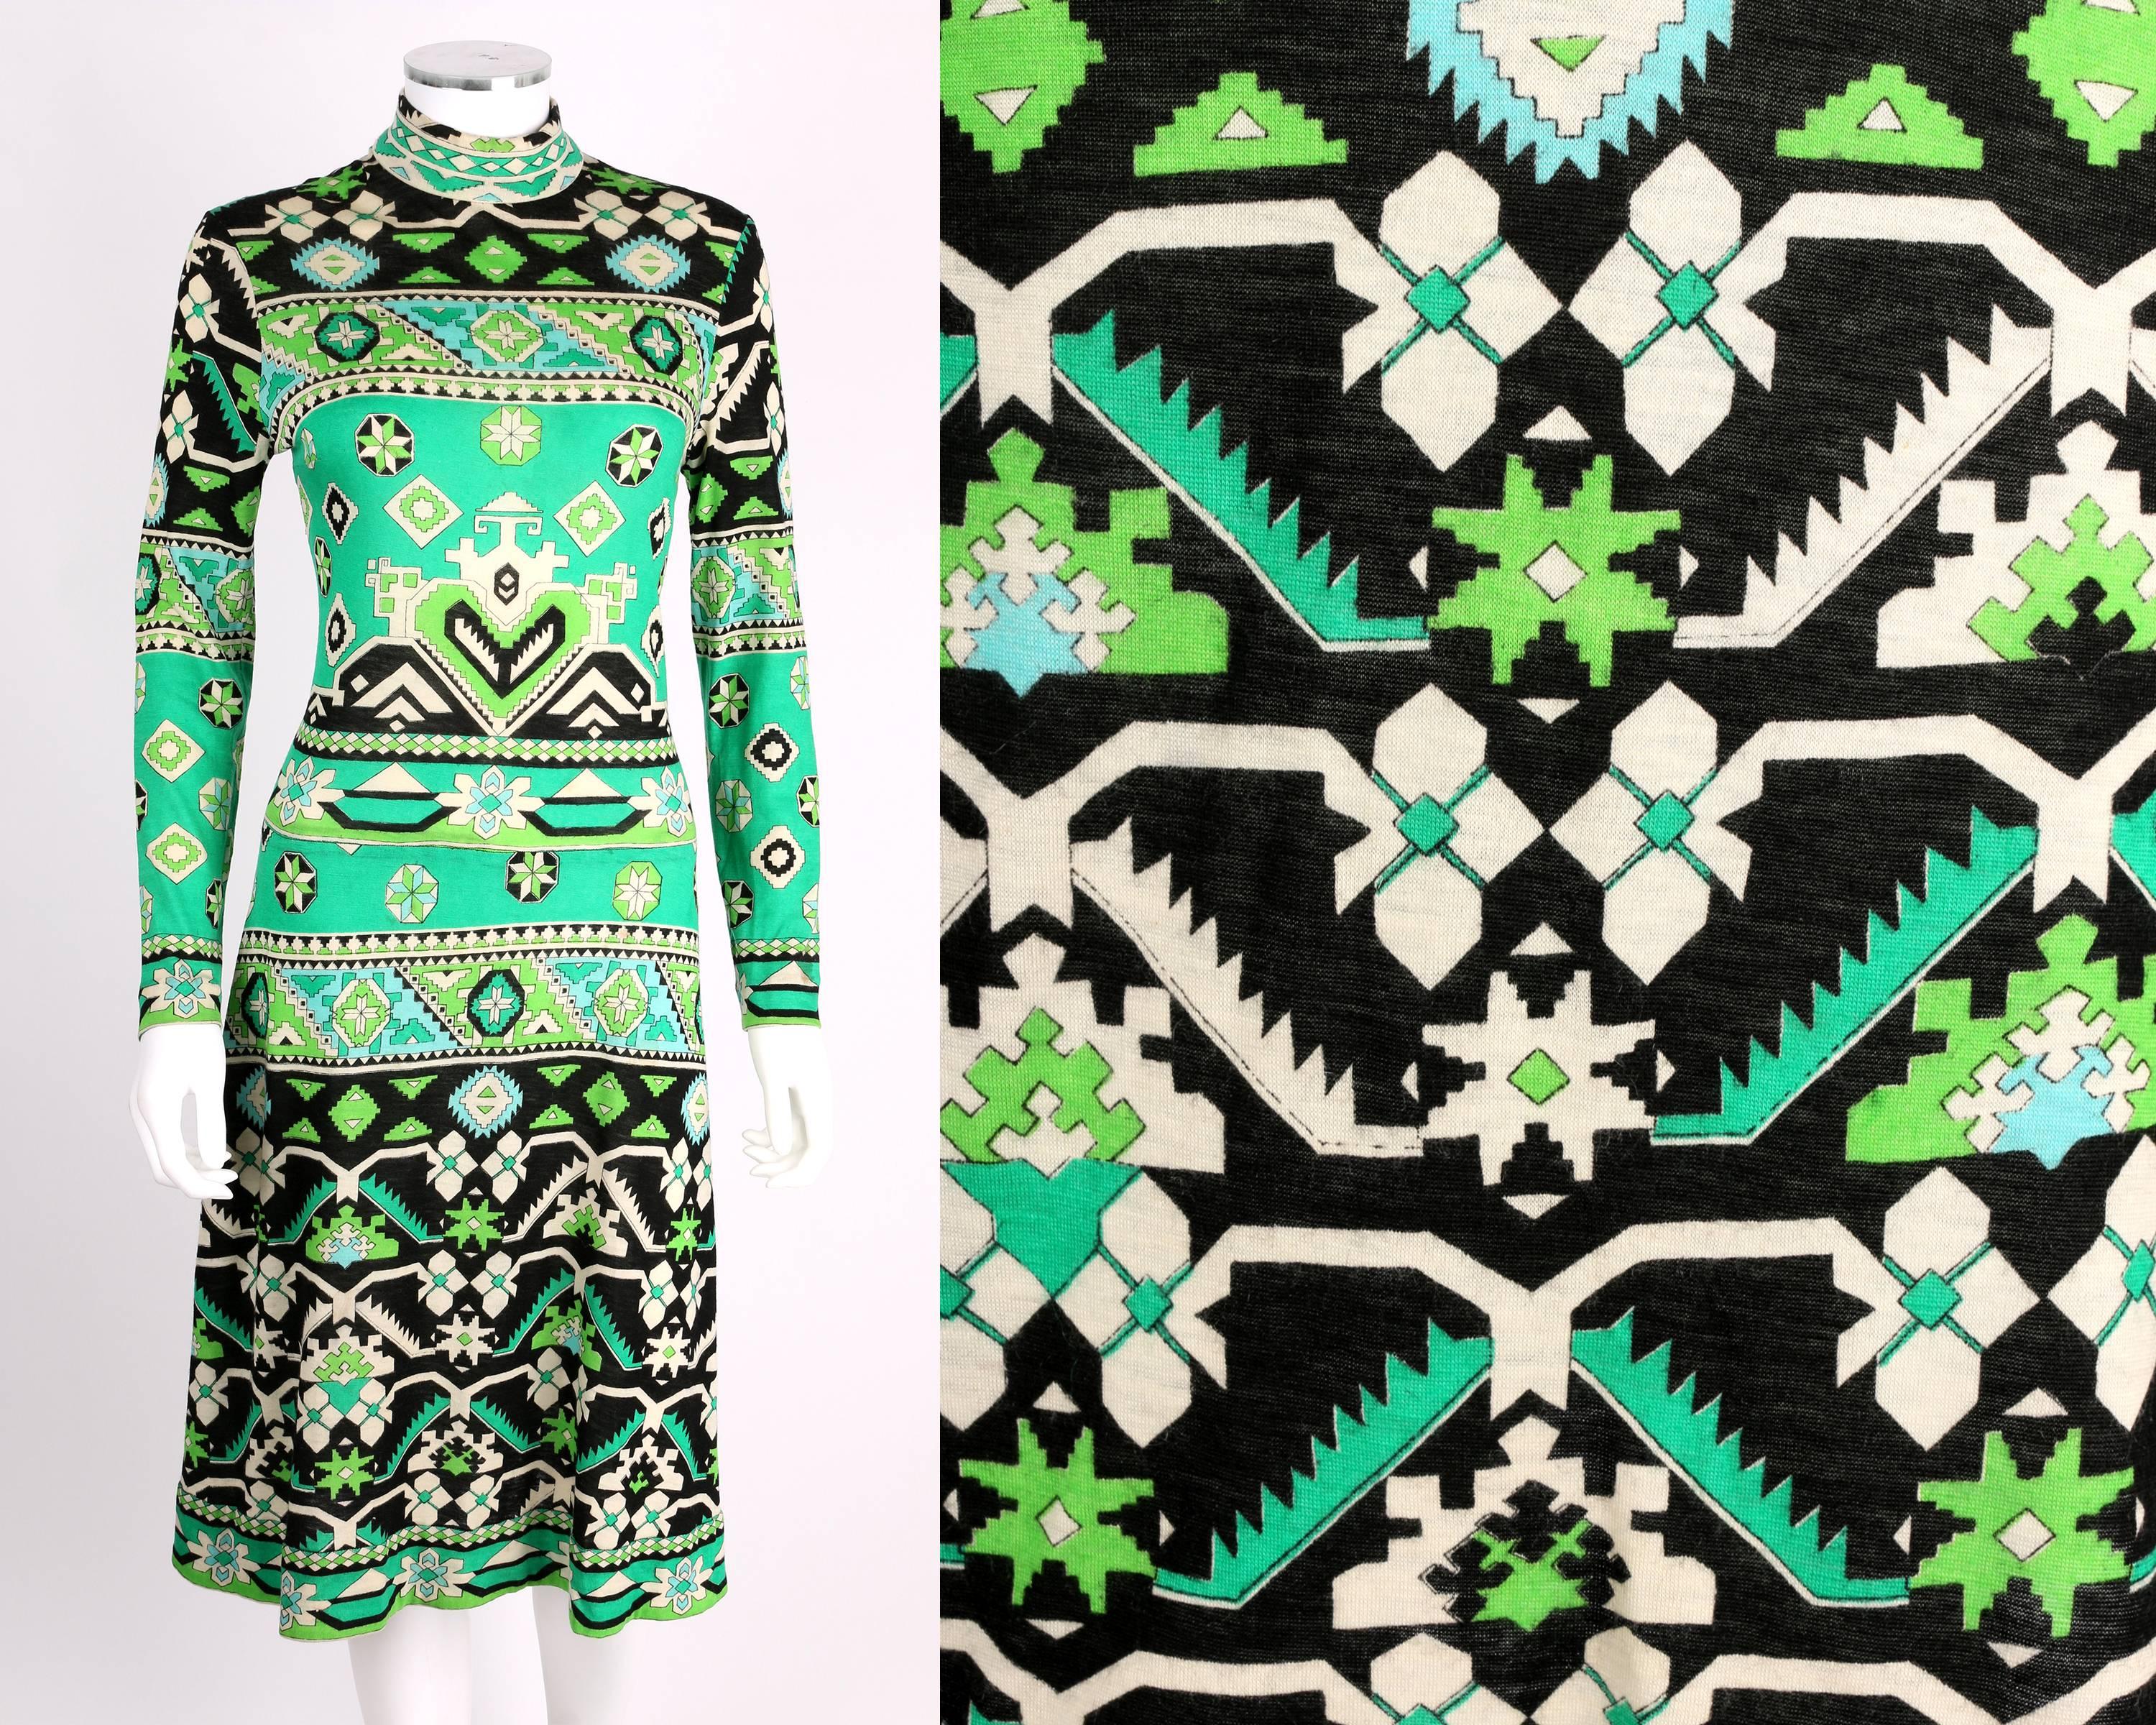 Vintage late 1960s Leonard Paris cashmere jersey dress with geometric tribal/floral print in shades of green, black and off-white. Mock neck collar. Long sleeves. Knee length. Zips at center back. Please note that this item was pinned to better fit